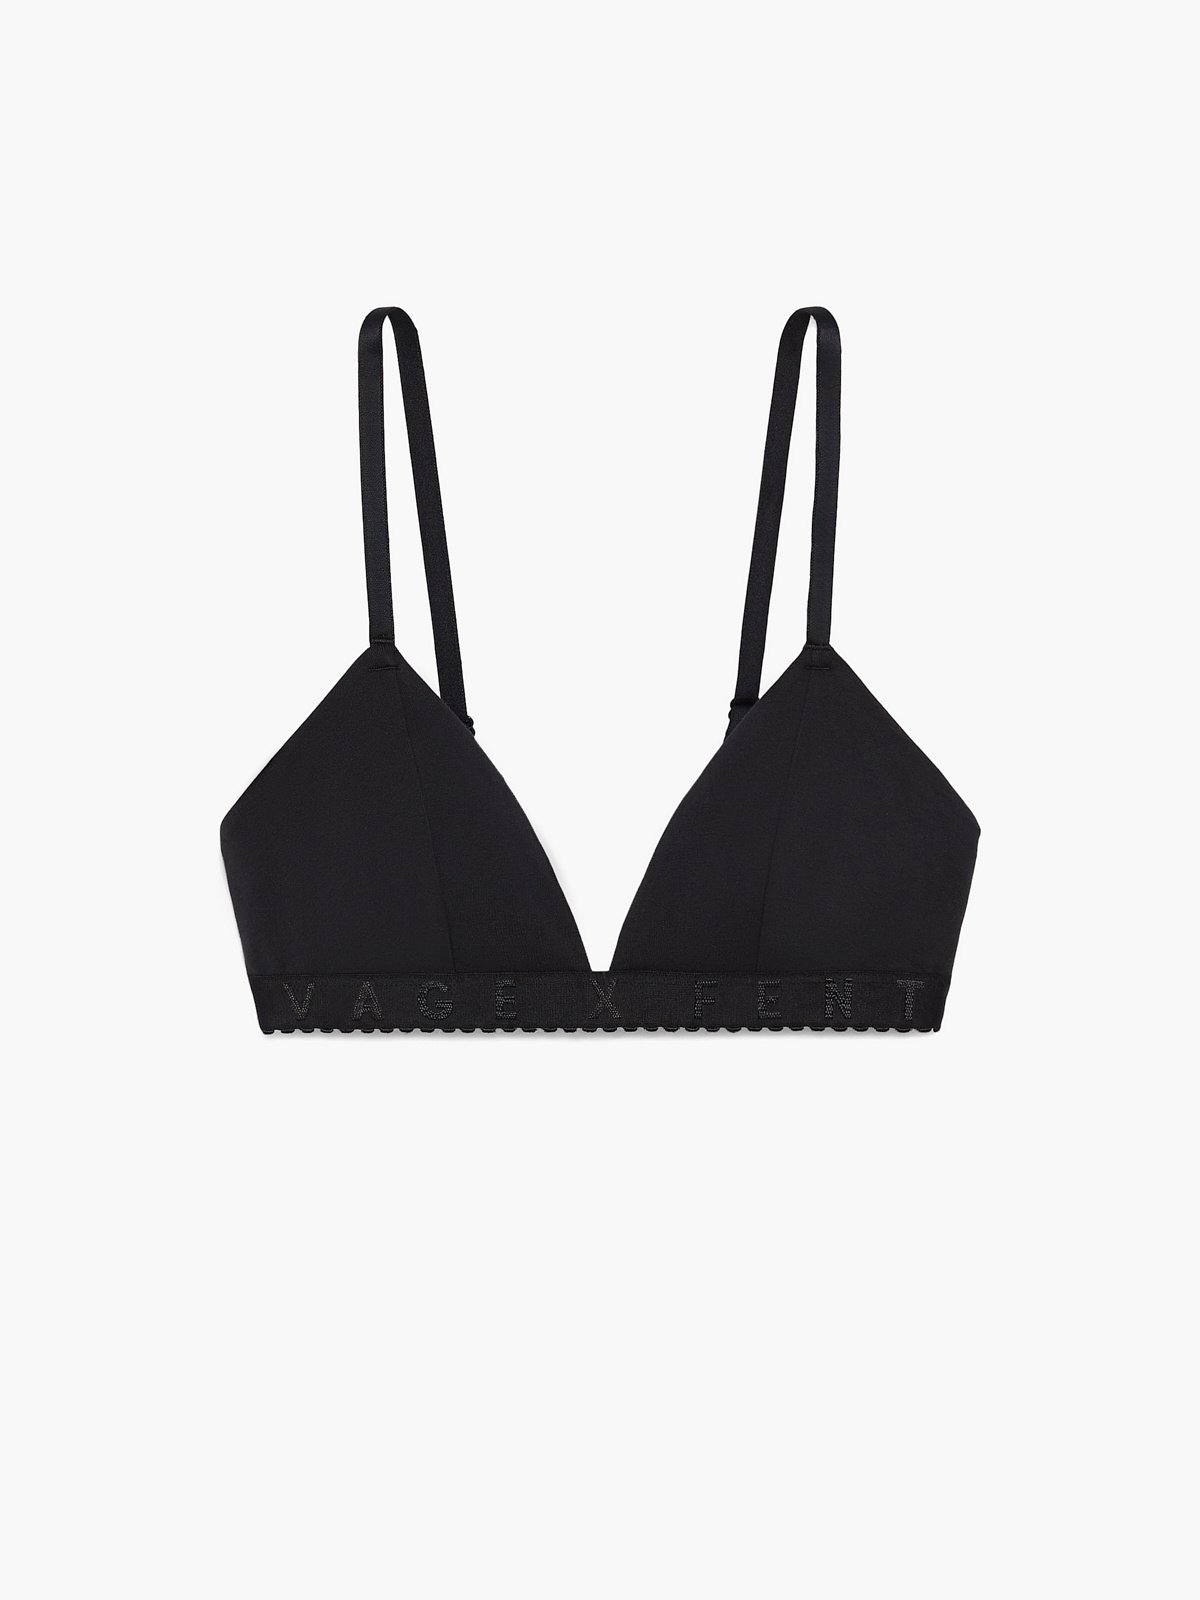 Savage x Fenty all over logo triangle bralette in heather gray print